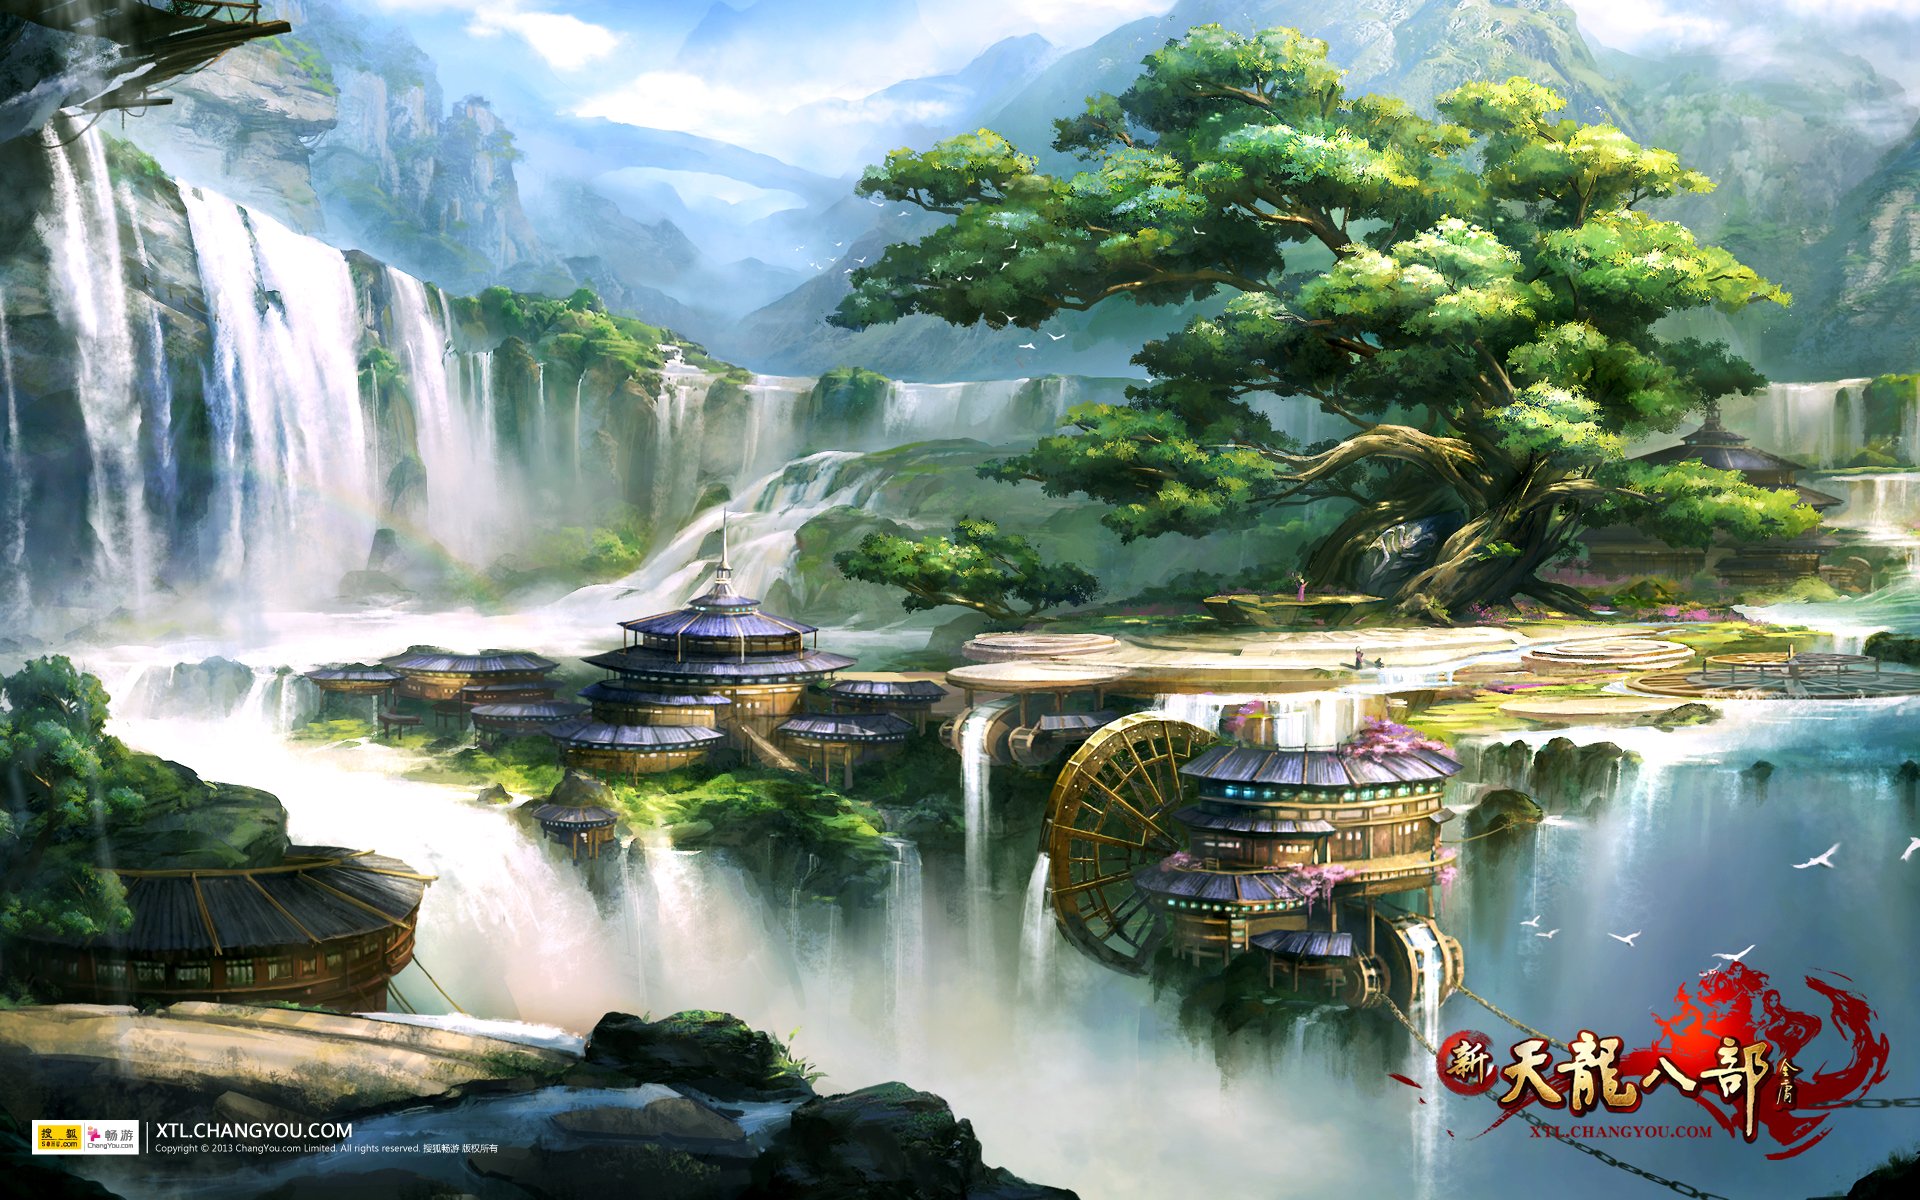 dragon, Oath, Martial, Kung, Action, Fighting, 1tlbb, Fantasy, Mmo, Rpg, Poster, Waterfall Wallpaper